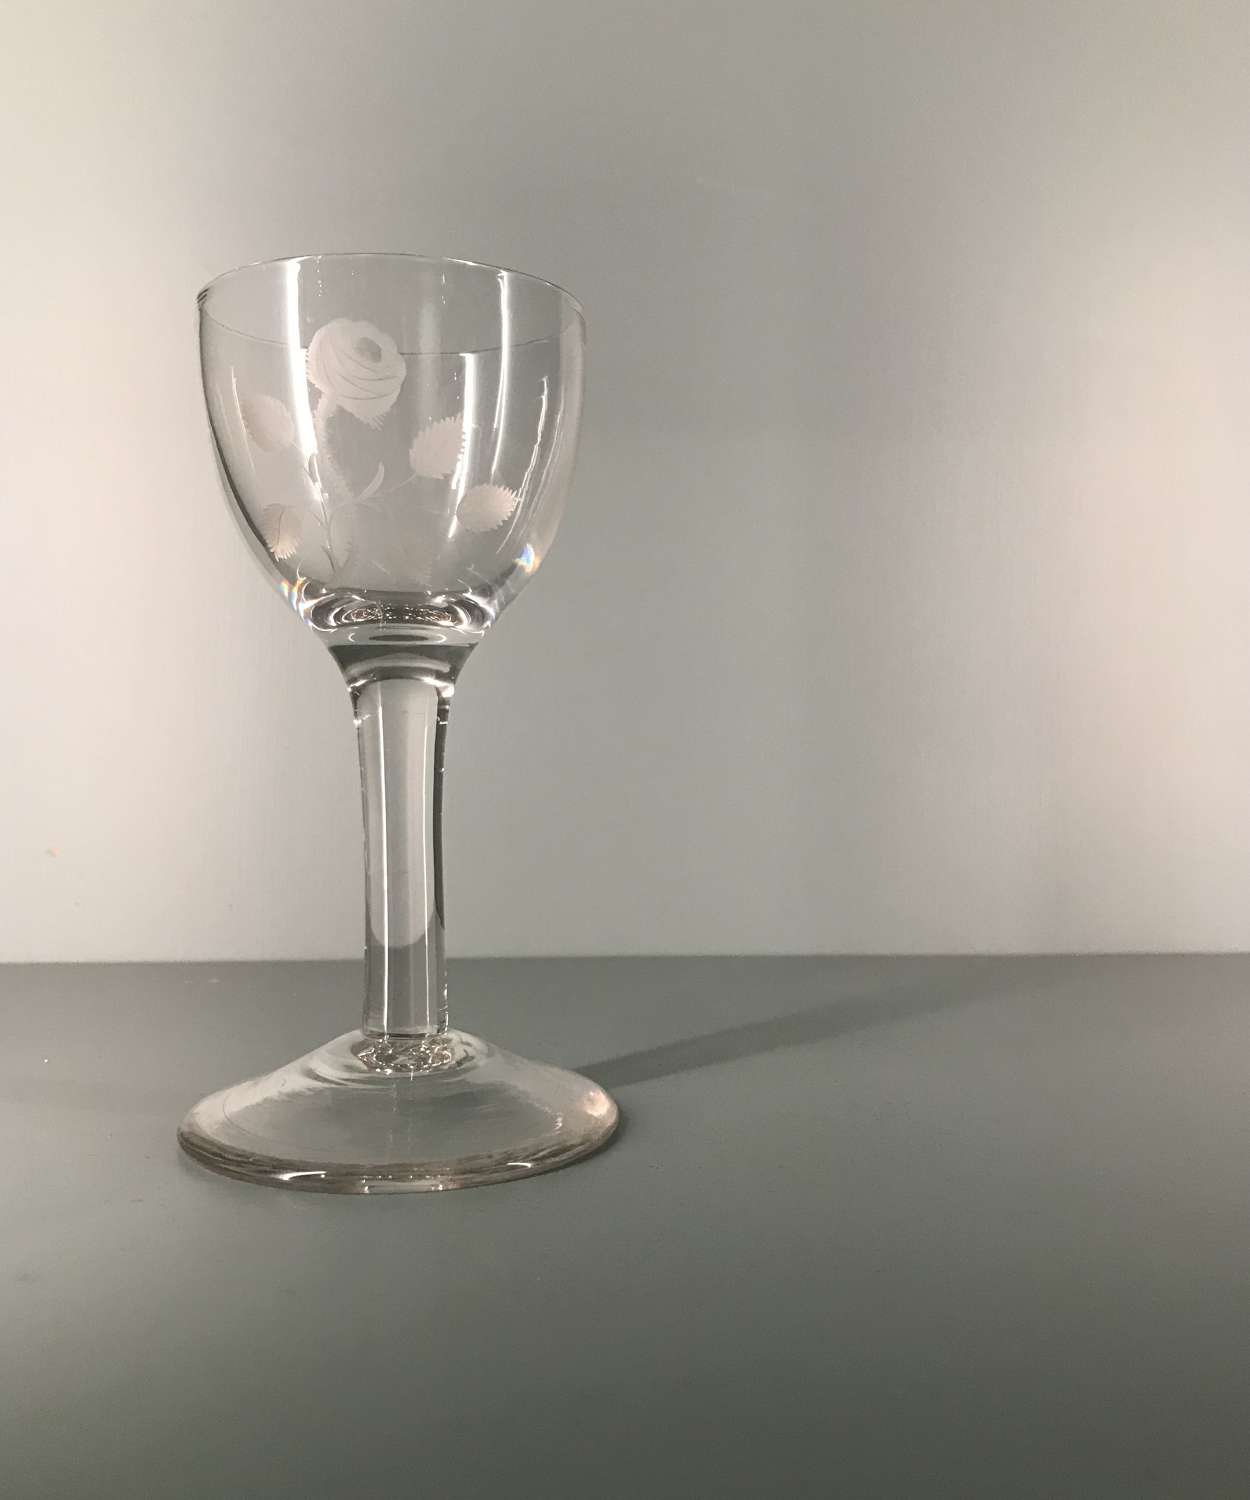 18th c. wine glass engraved with rose